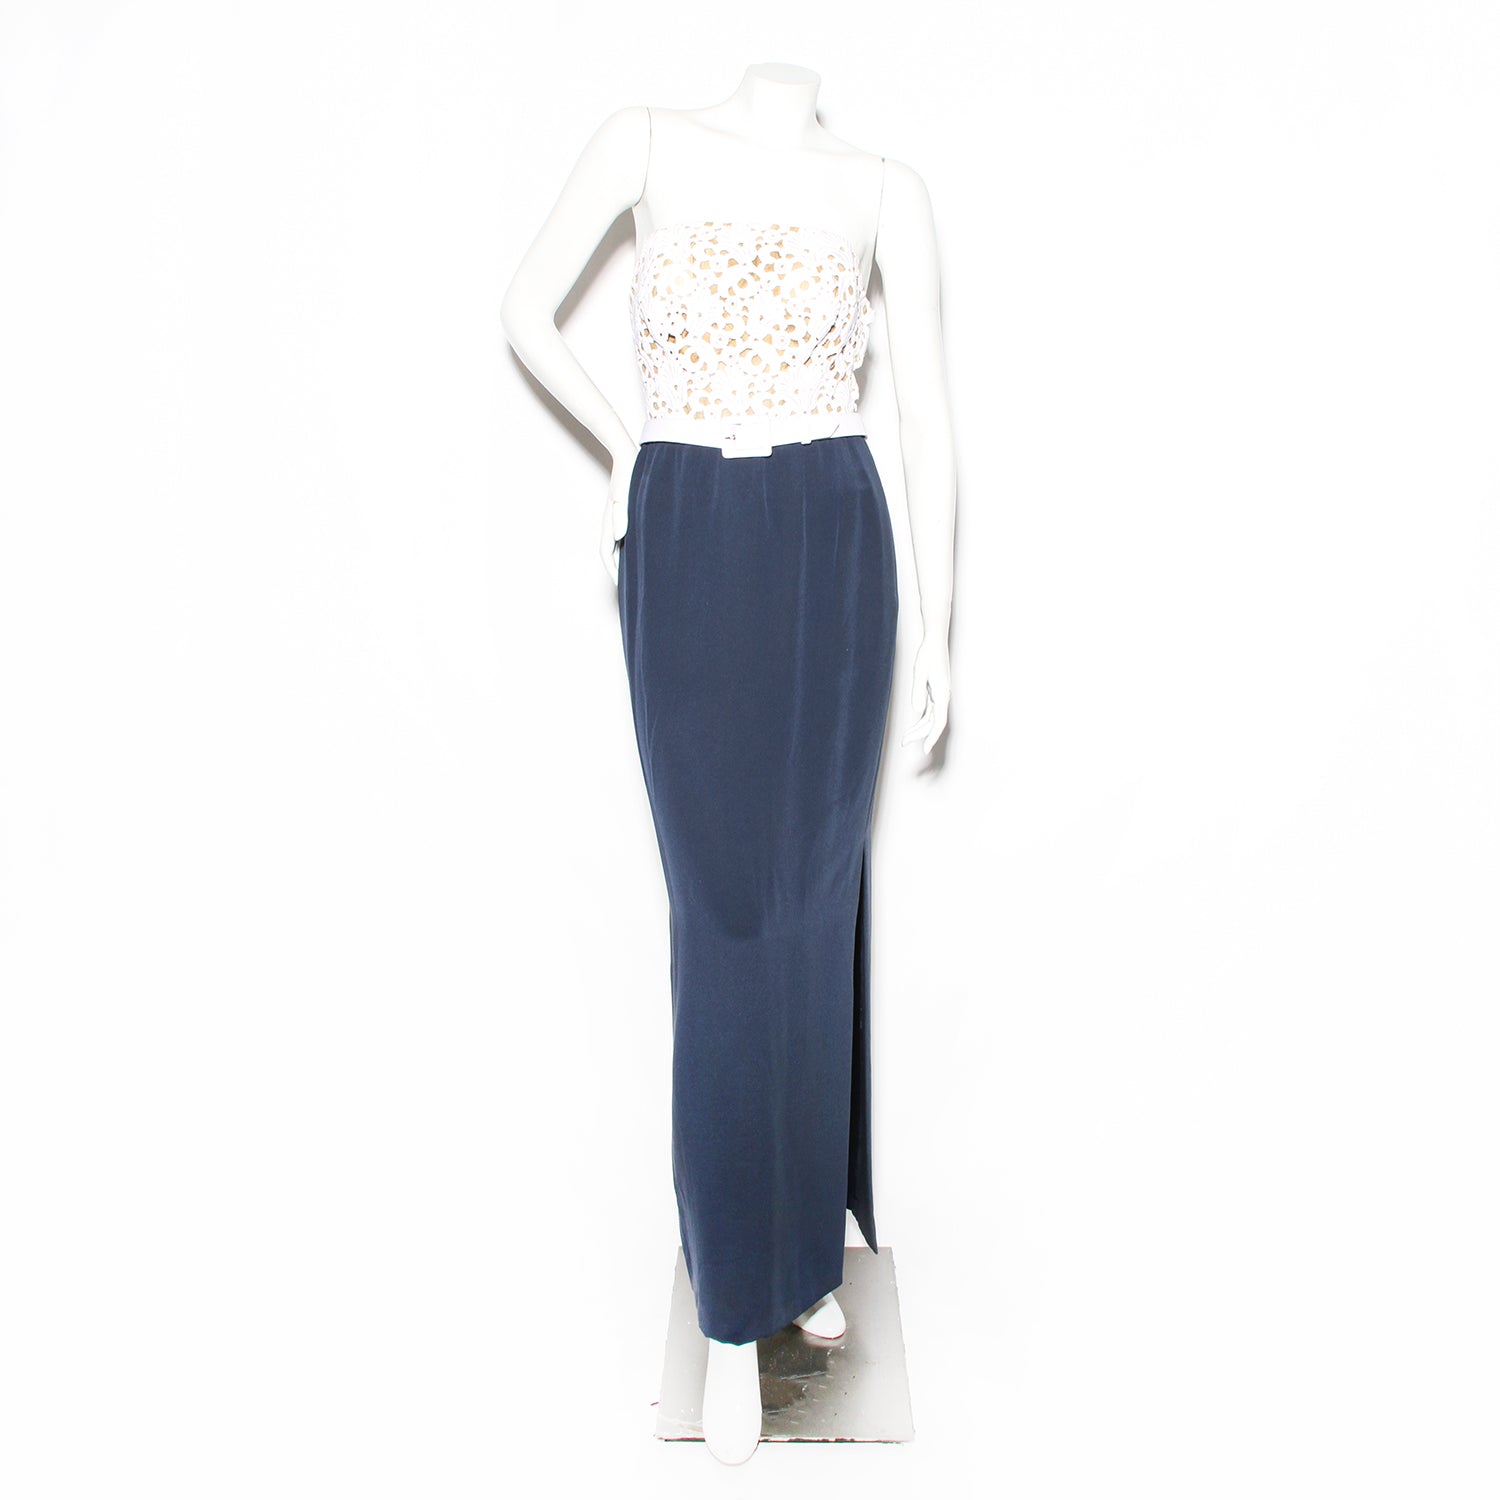 Yves Saint Laurent Haute Couture Lace and Navy Gown